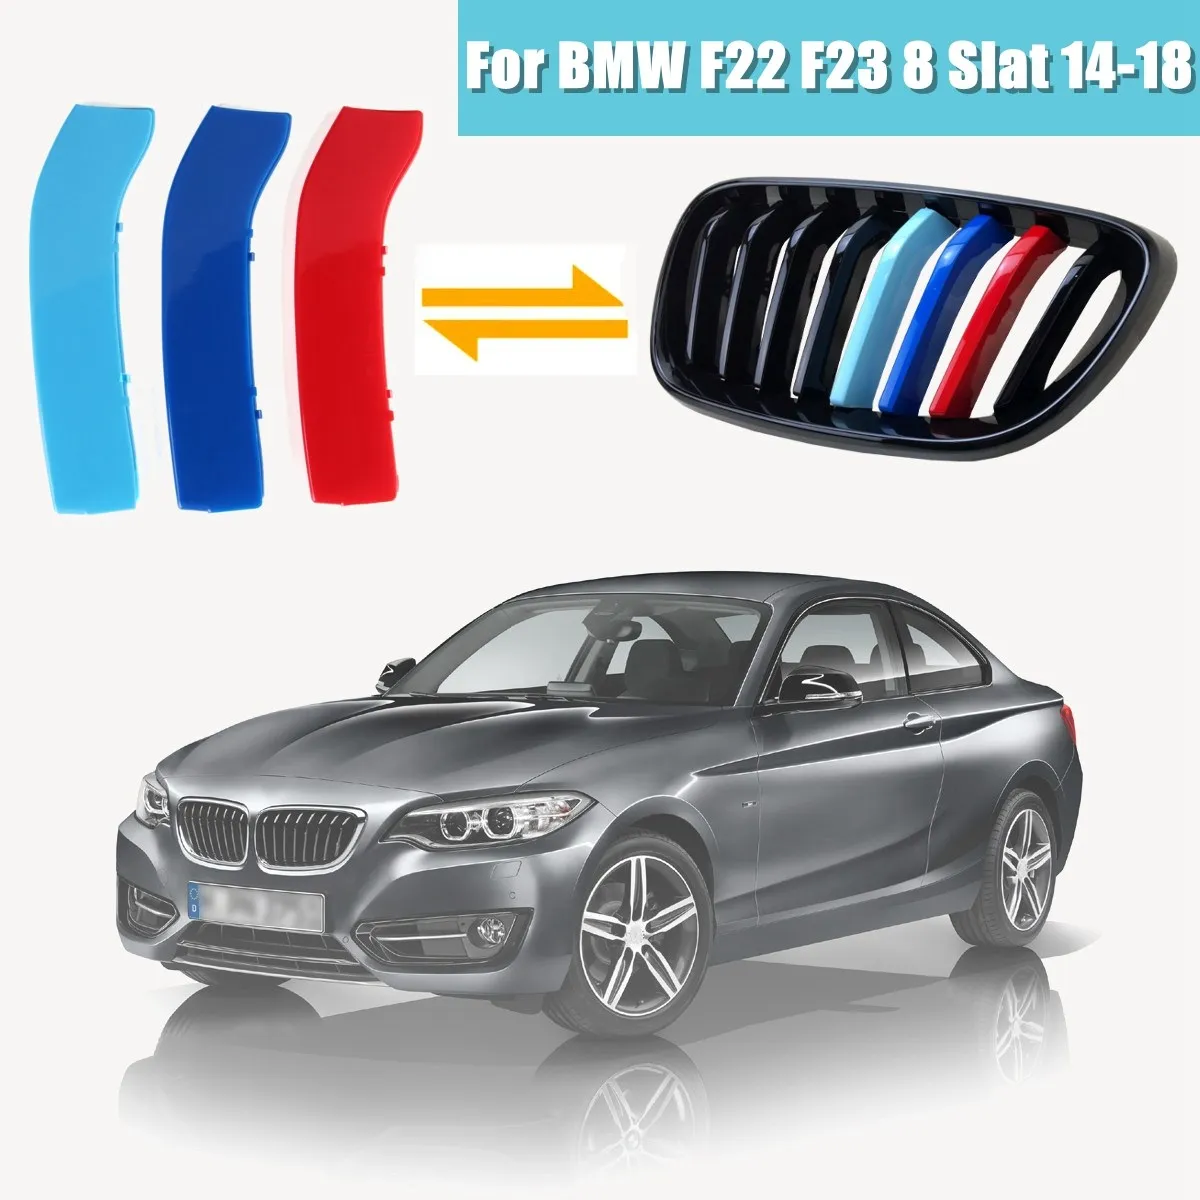 Tricolor Front 8 Slat Grille Trim Strips Cover Decoration ABS Clip For BMW 2 Series F22 F23